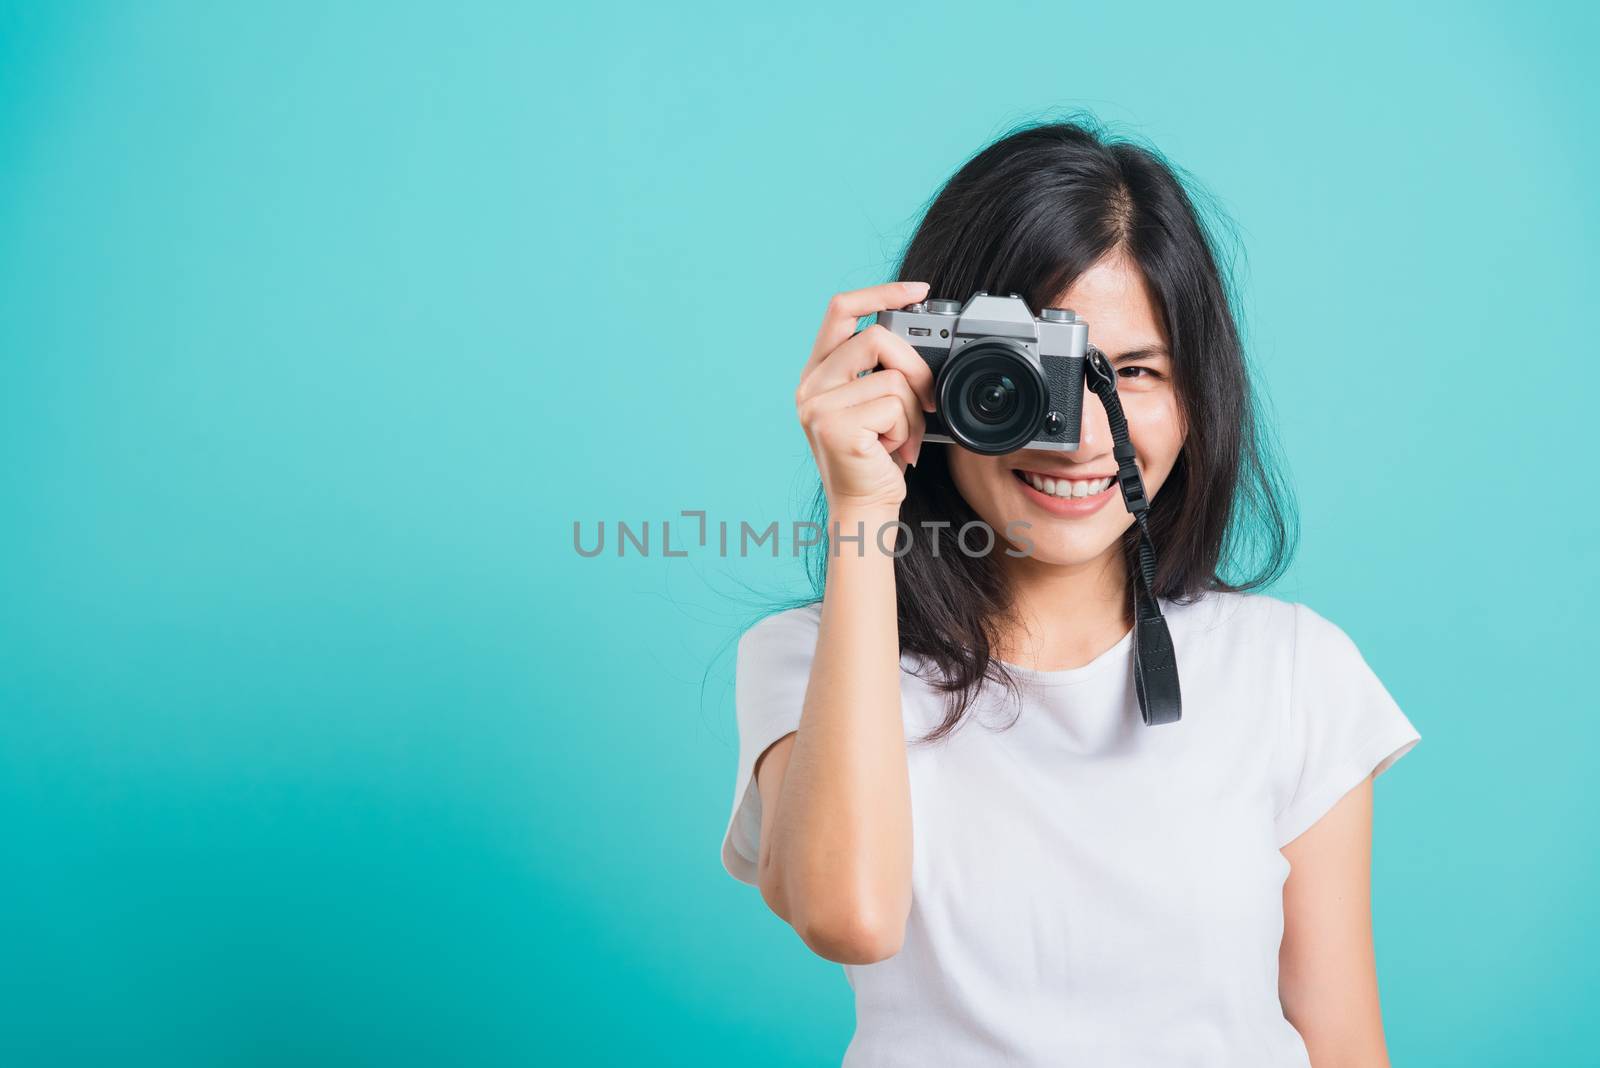 Traveler tourist happy Asian beautiful young woman smile in summer hat standing with mirrorless photo camera, shoot photo in studio on blue background with copy space for text